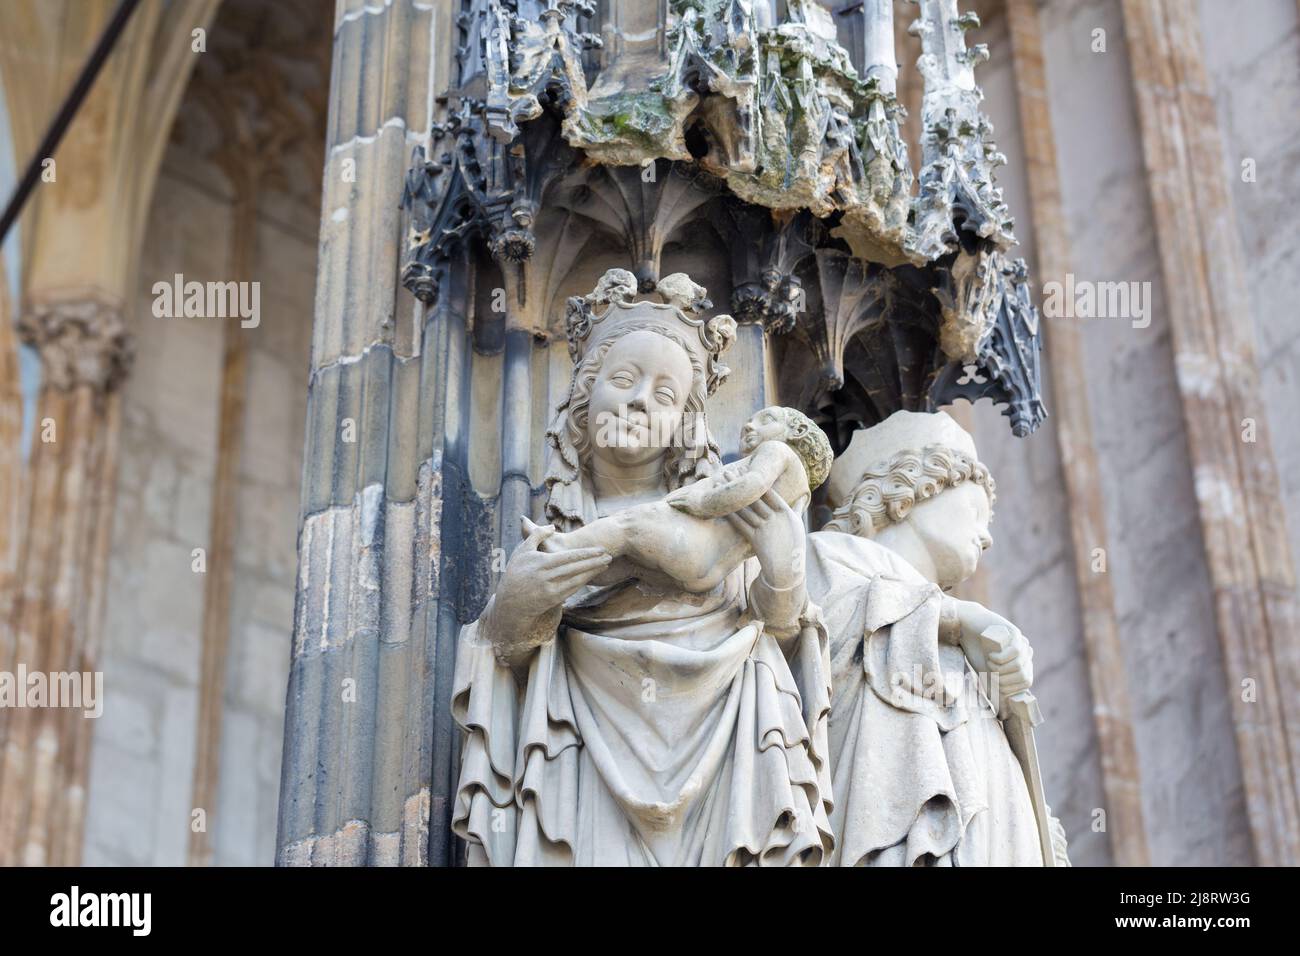 Ulm, Germany - Aug 8, 2021: Close-up of a Mary statue with newborn Jesus at the main portal Ulm Cathedral. Stock Photo